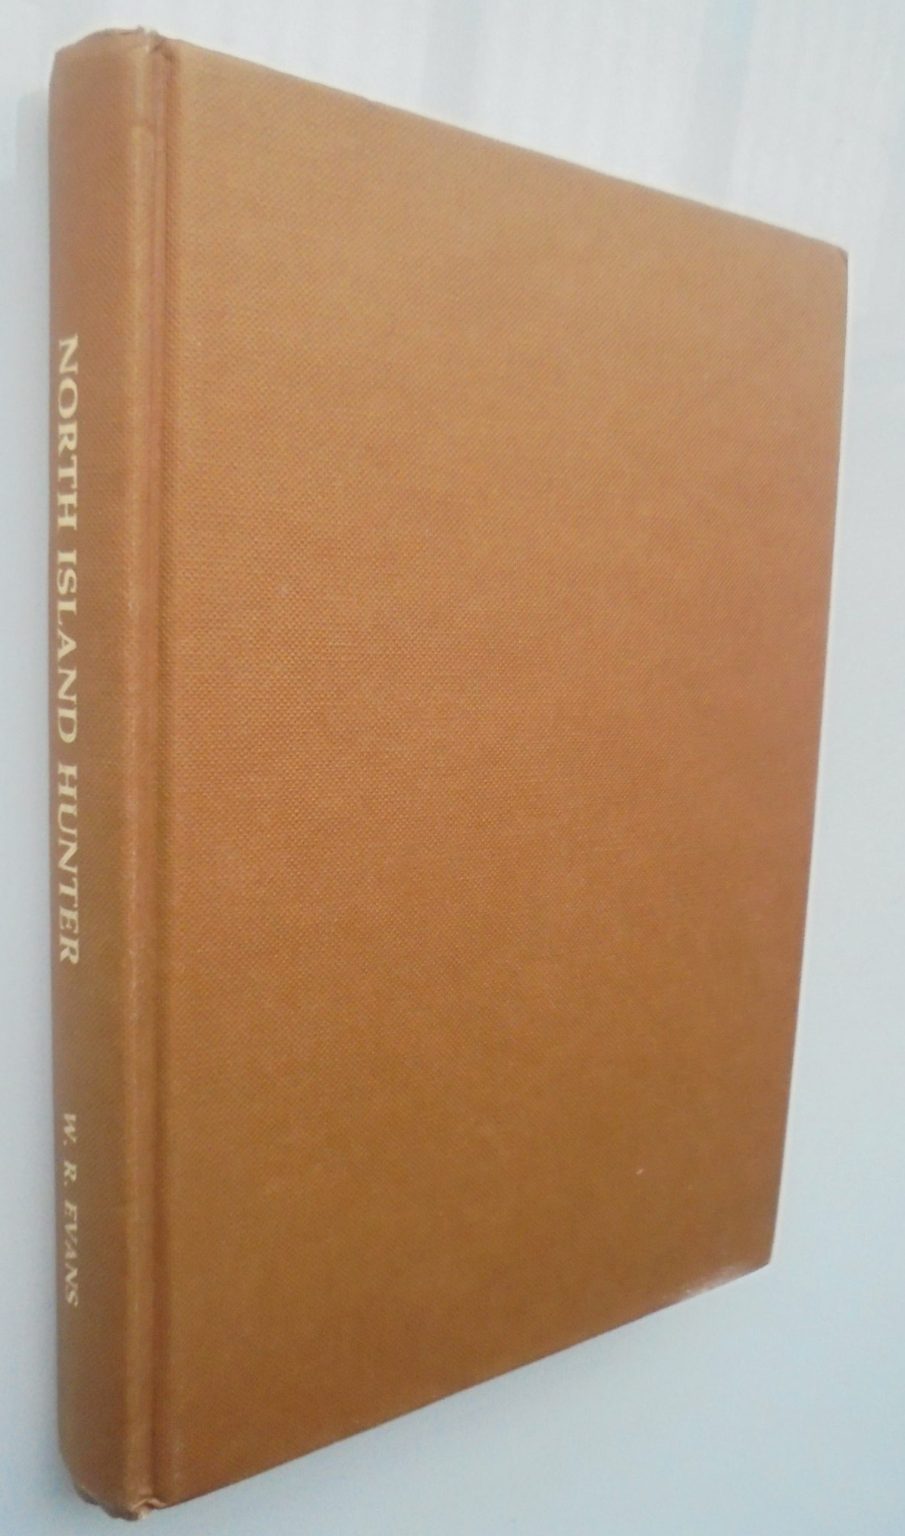 North Island Hunter. By W R. Evans. 1976, First Edition. VERY SCARCE.